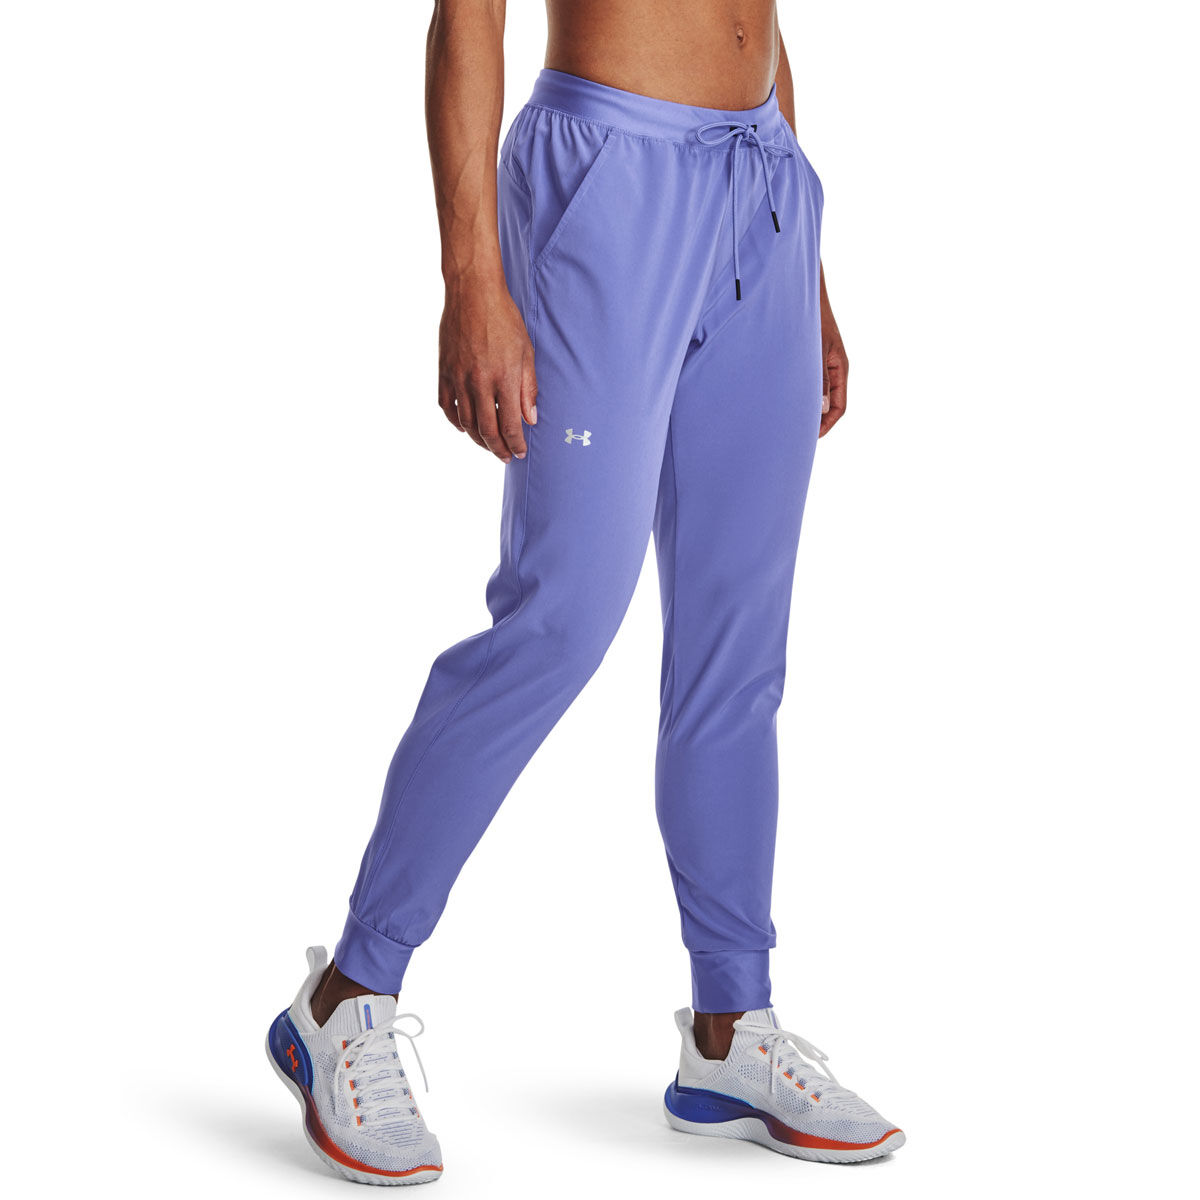 Women's Armour Sport Woven Pant from Under Armour